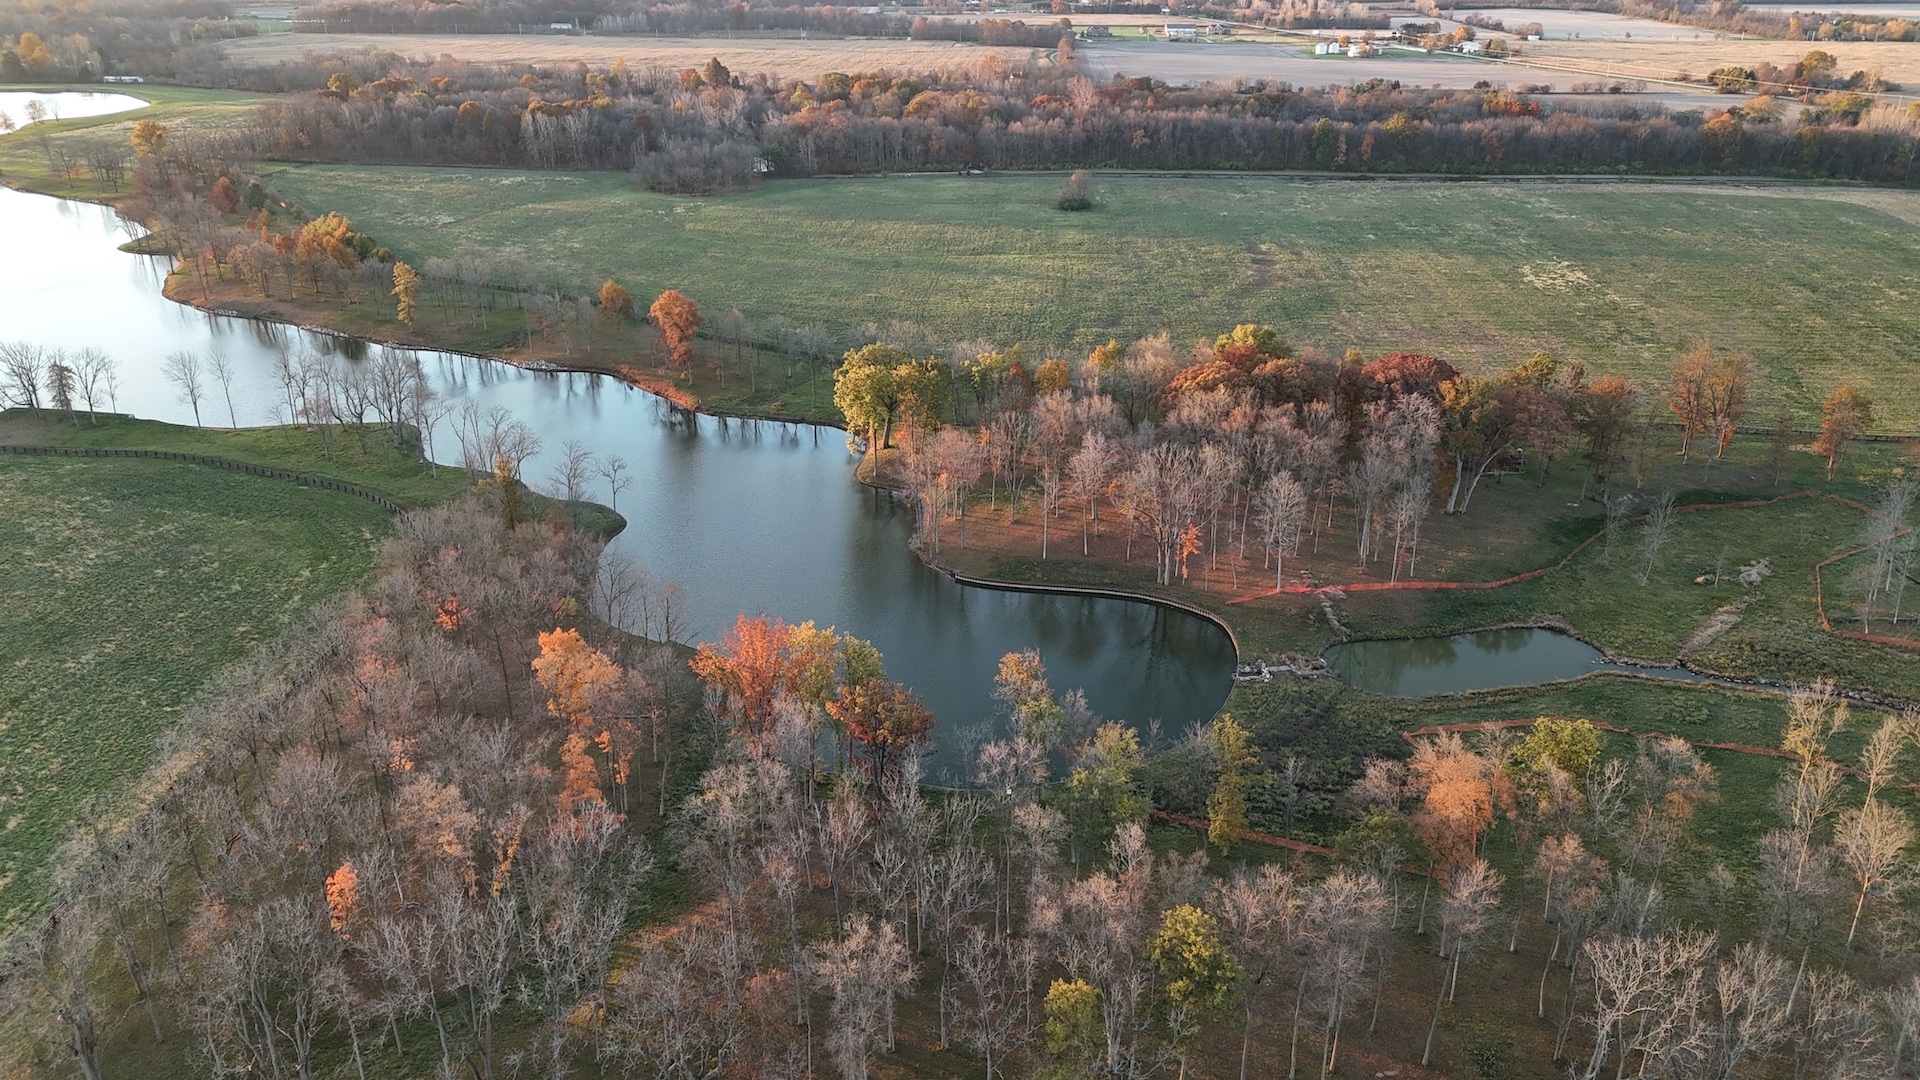 An aerial view of a pond surrounded by trees in Fishers, Indiana.